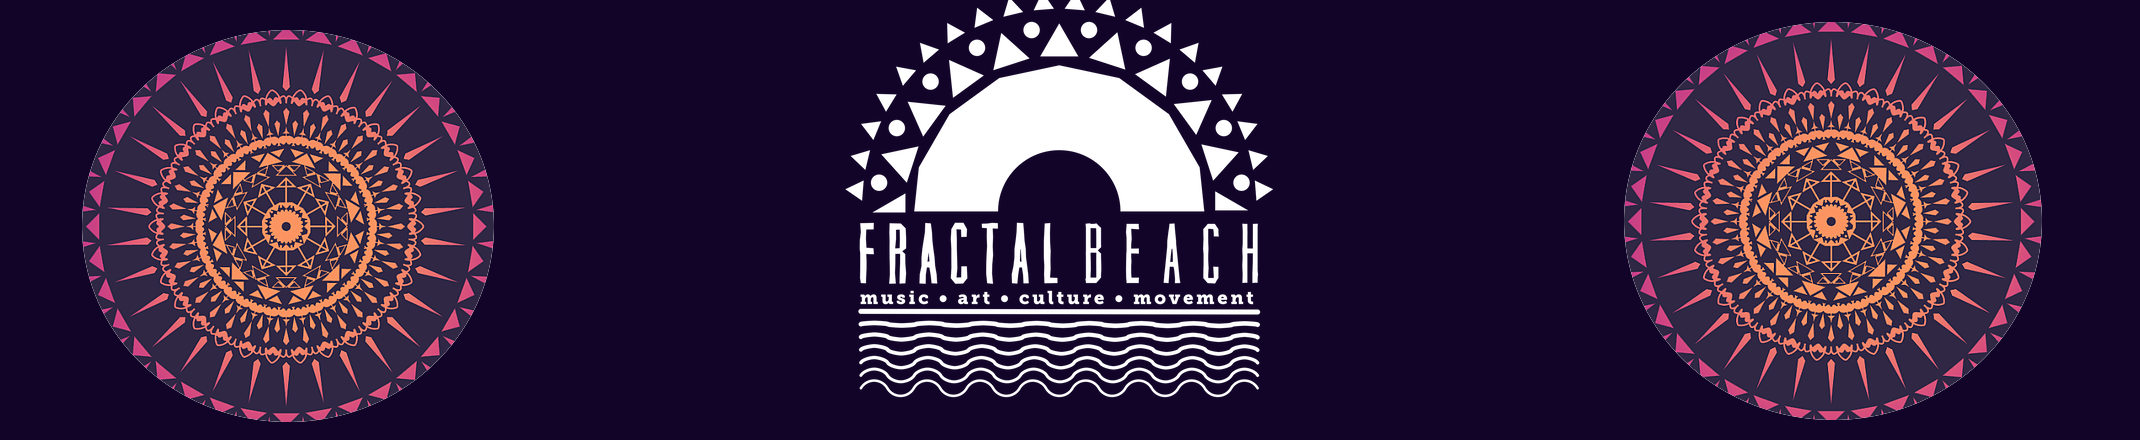 Fractal Beach Festival Brings the Party to Miami this February